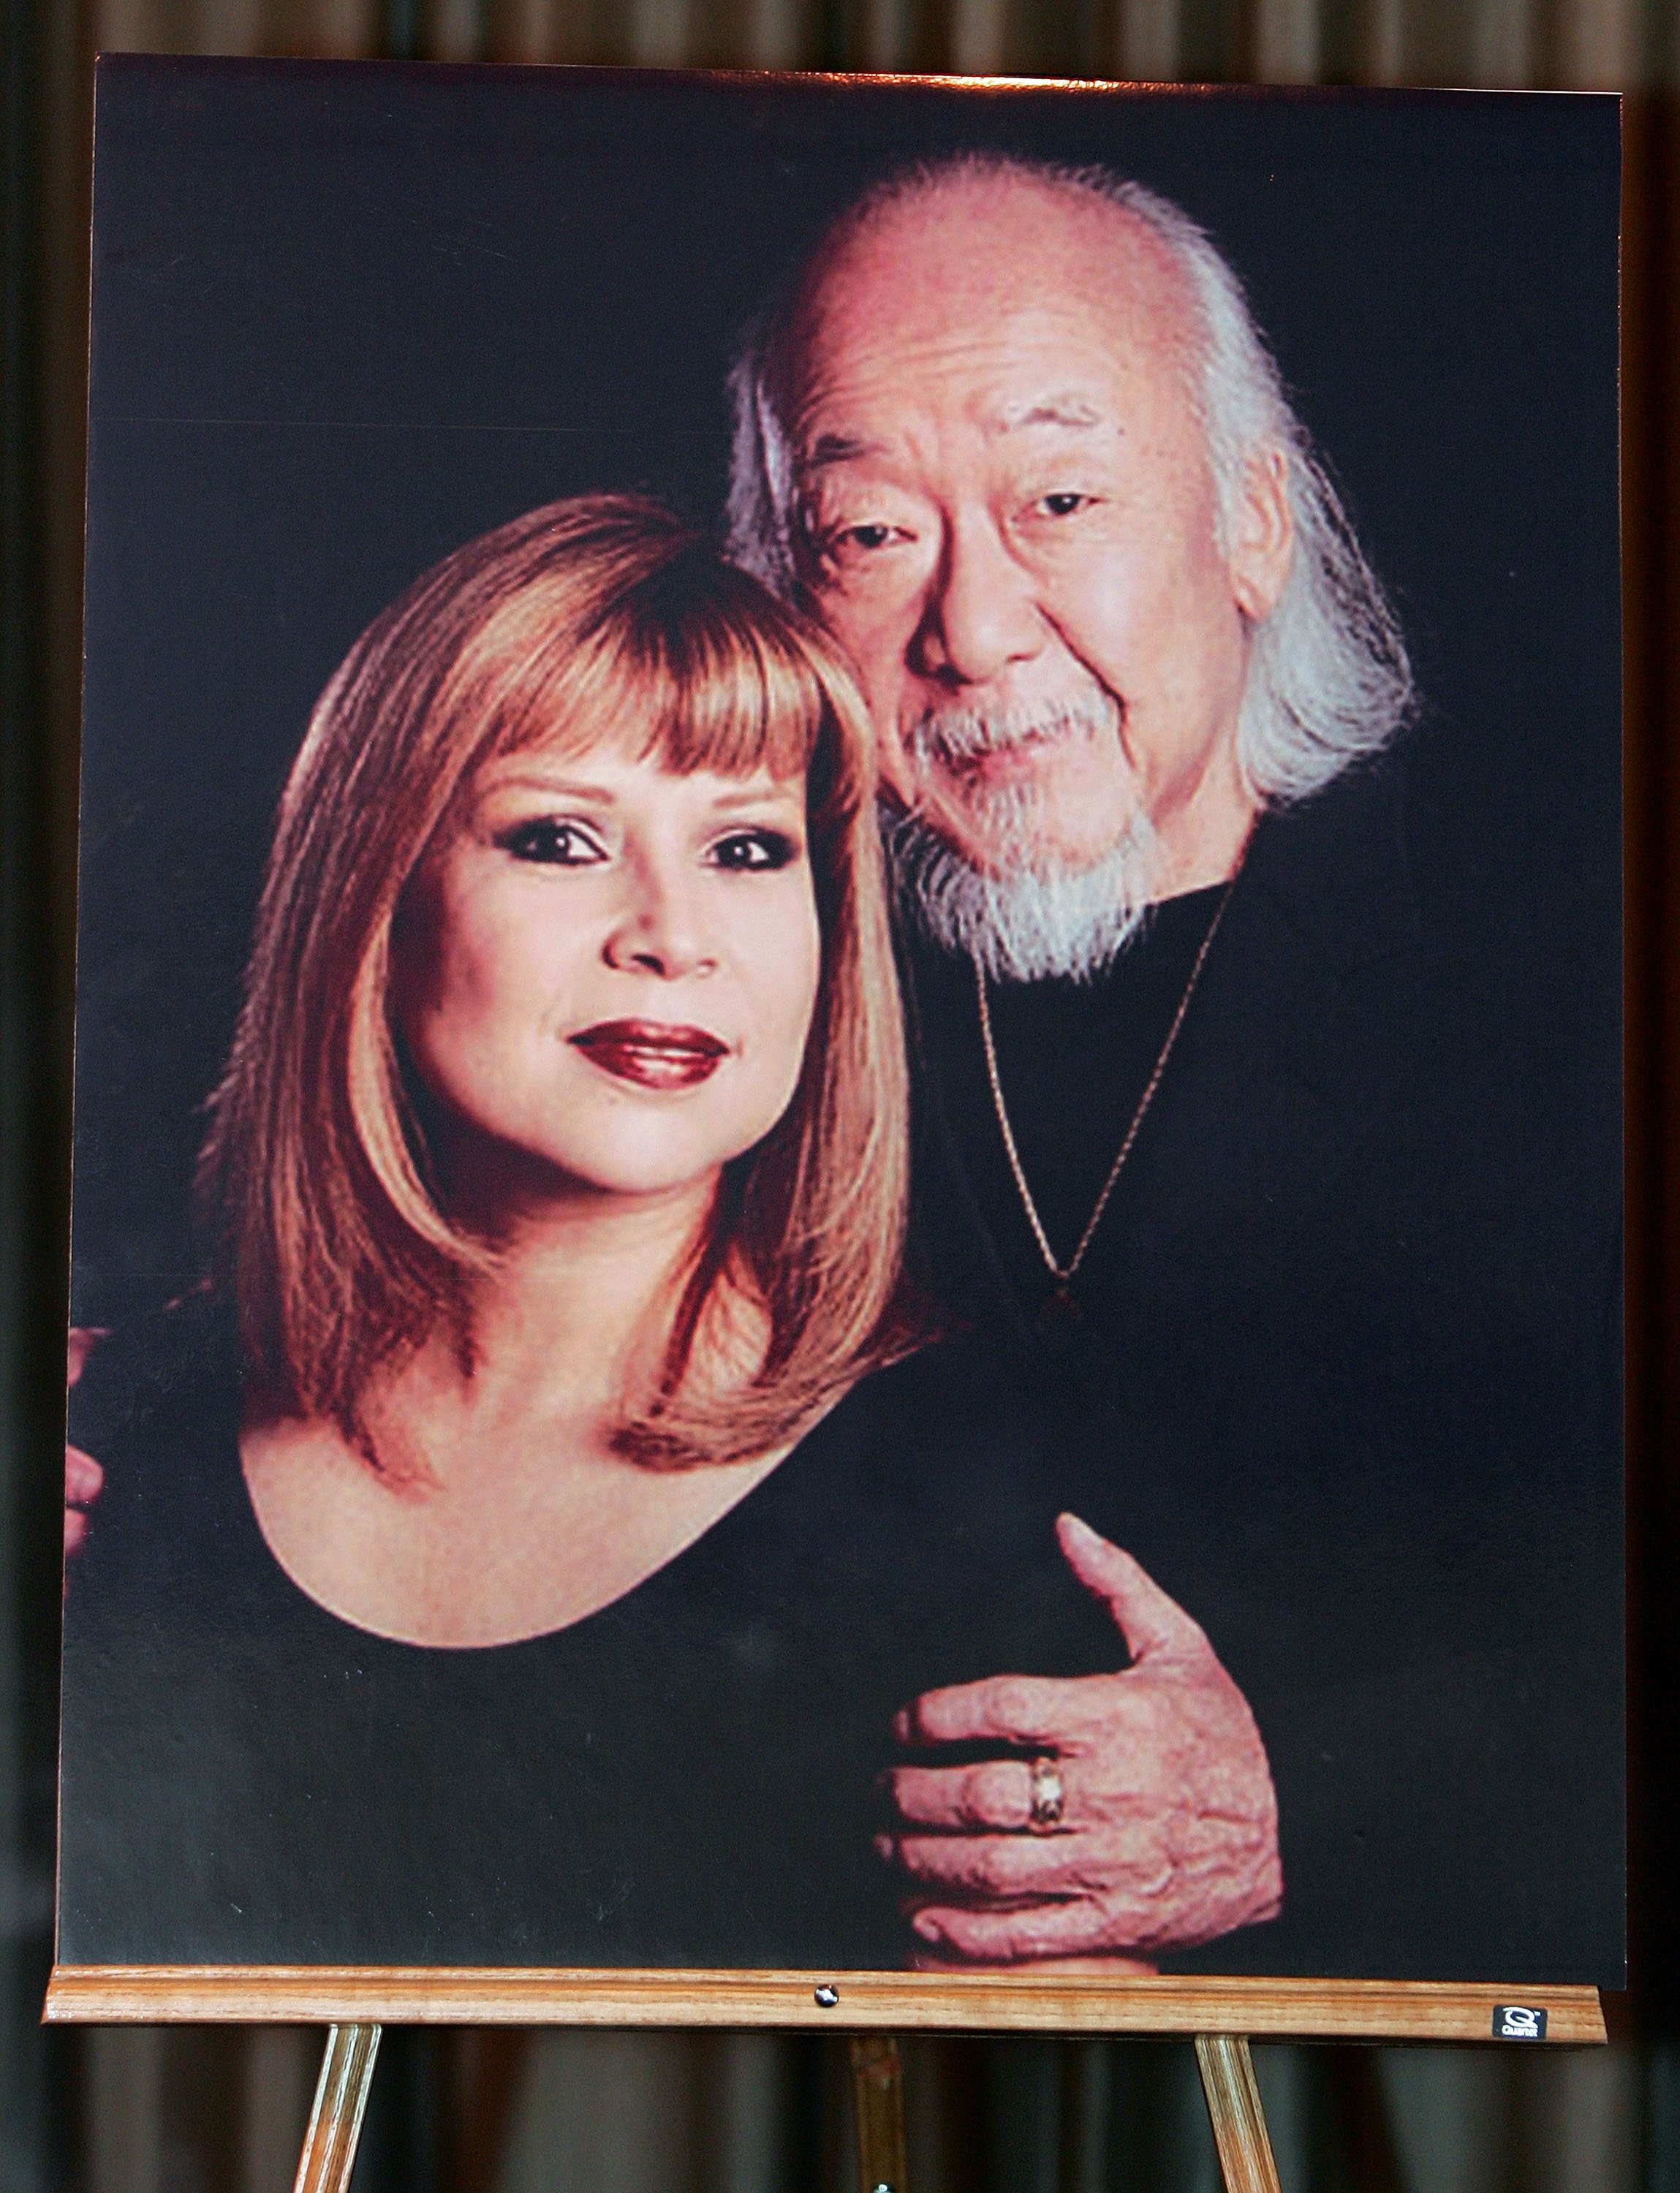 A photo of Pat Morita and his wife, Evelyn Guerrero, displayed during a memorial service for him at the Palm Mortuary & Memorial Park November 30, 2005 in Las Vegas, Nevada. | Source: Getty Images